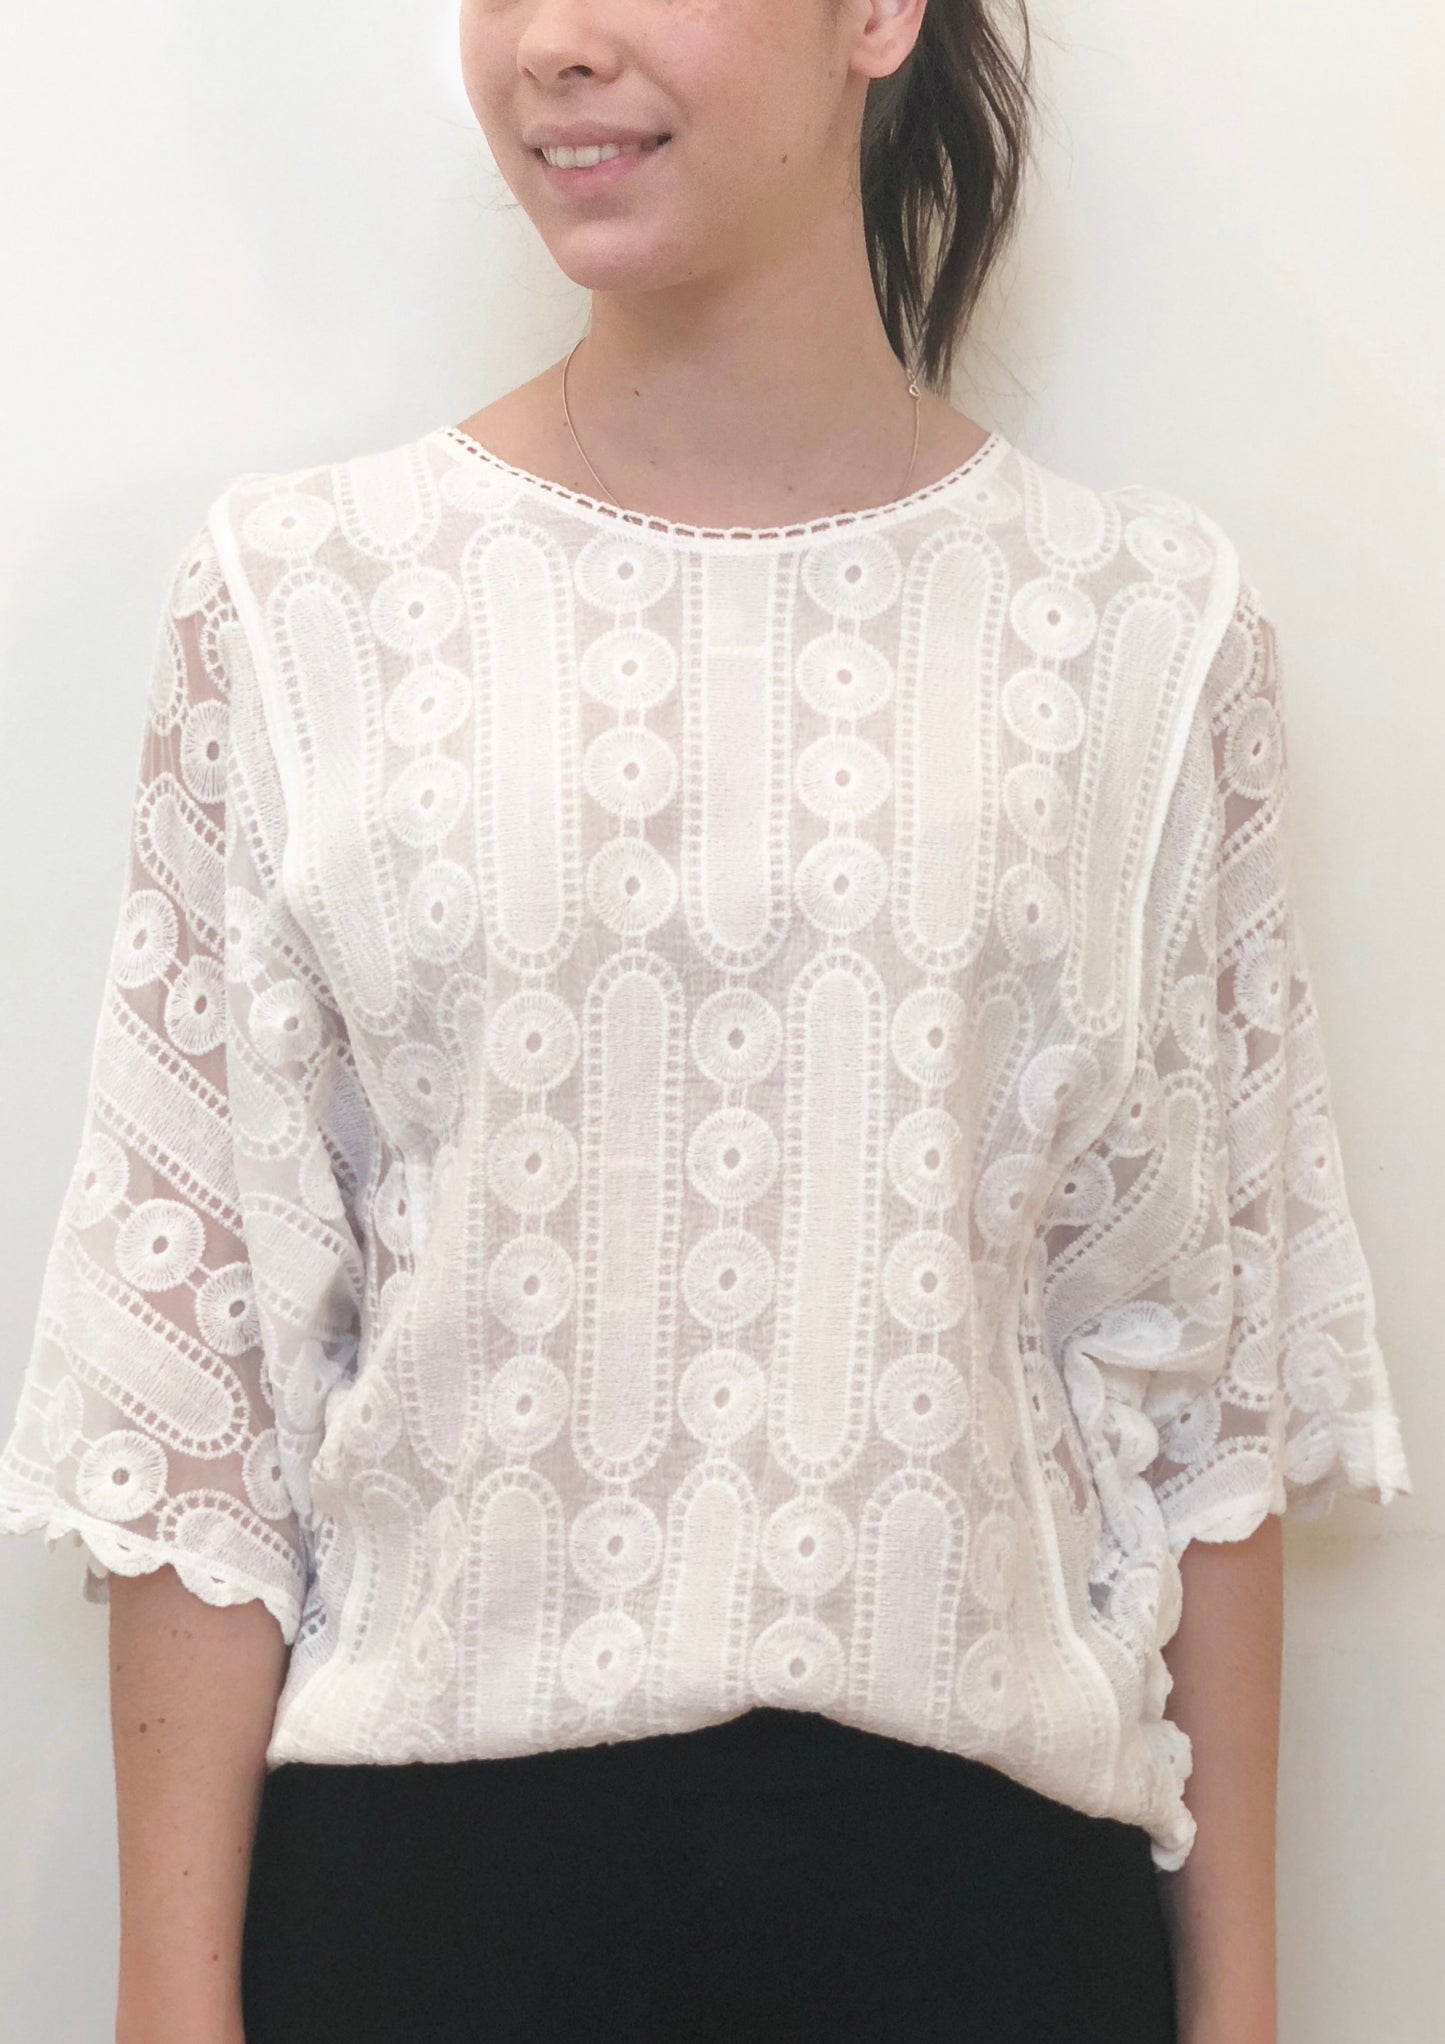 XX009SS Embroidered Crochet Top (Pack) New Arrival